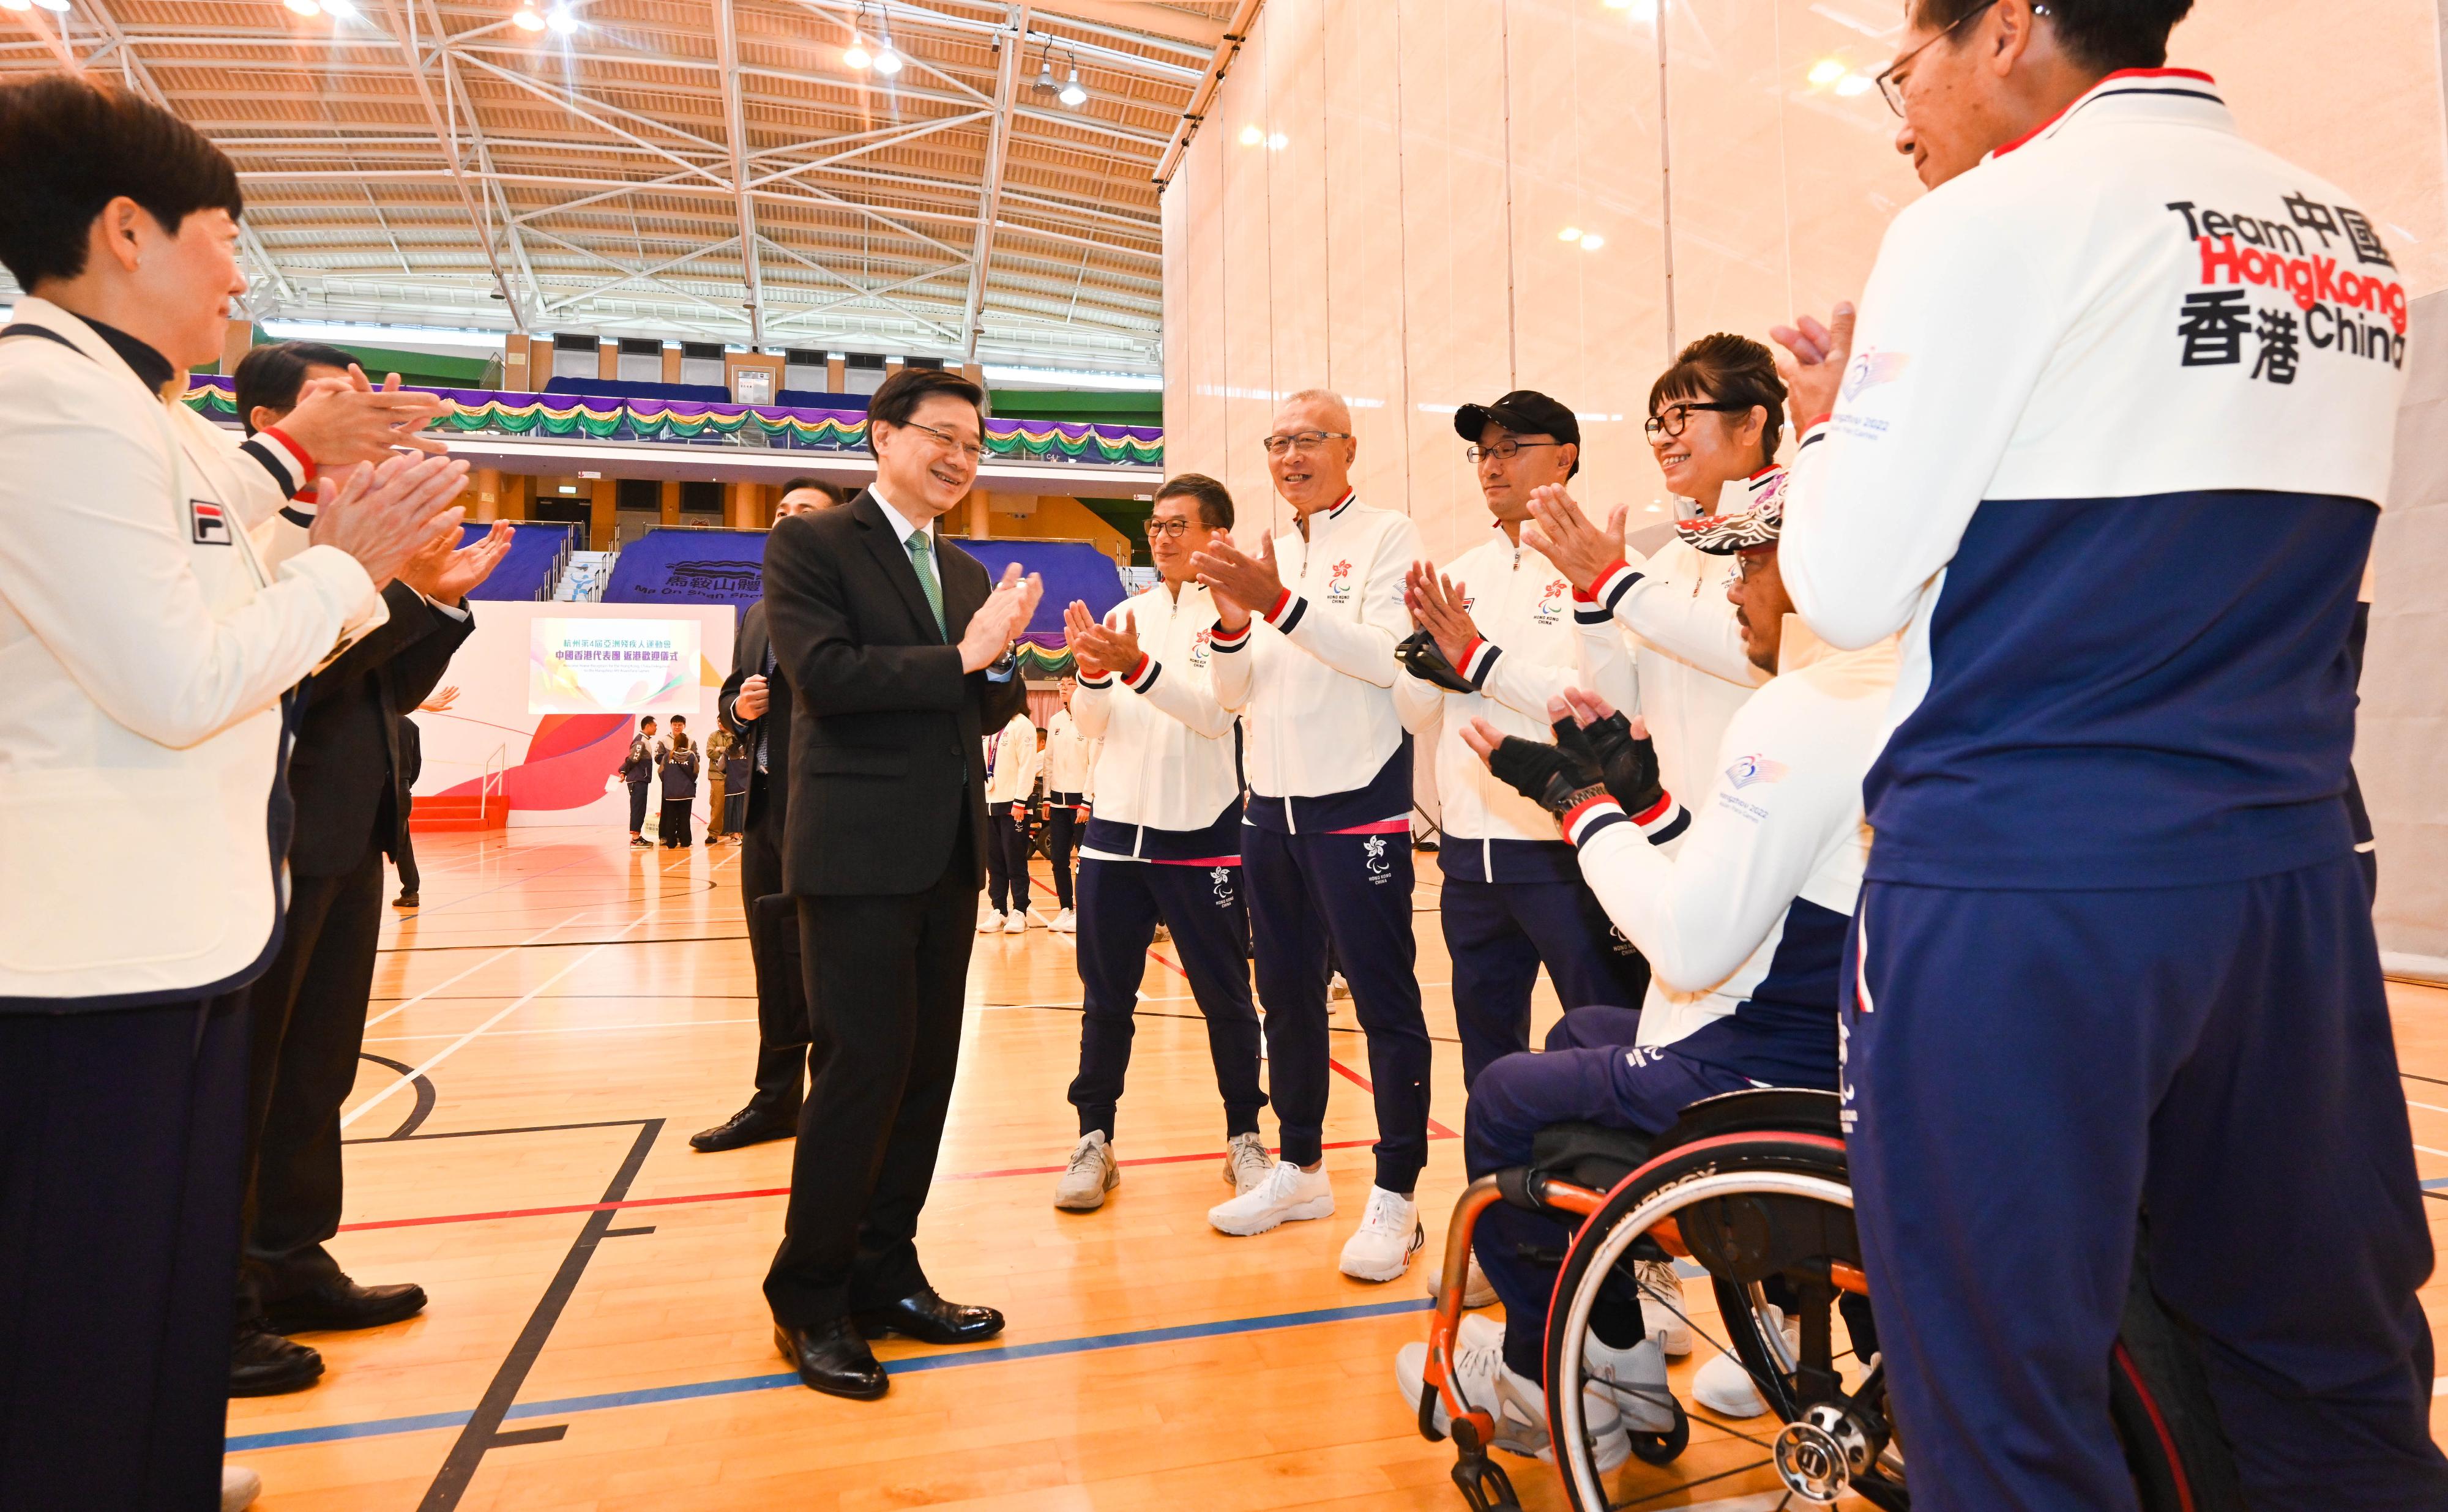 The Chief Executive, Mr John Lee, attended the welcome home reception for the Hong Kong, China Delegation from the 4th Asian Para Games Hangzhou today (November 13). Photo shows Mr Lee (centre) interacting with athletes.